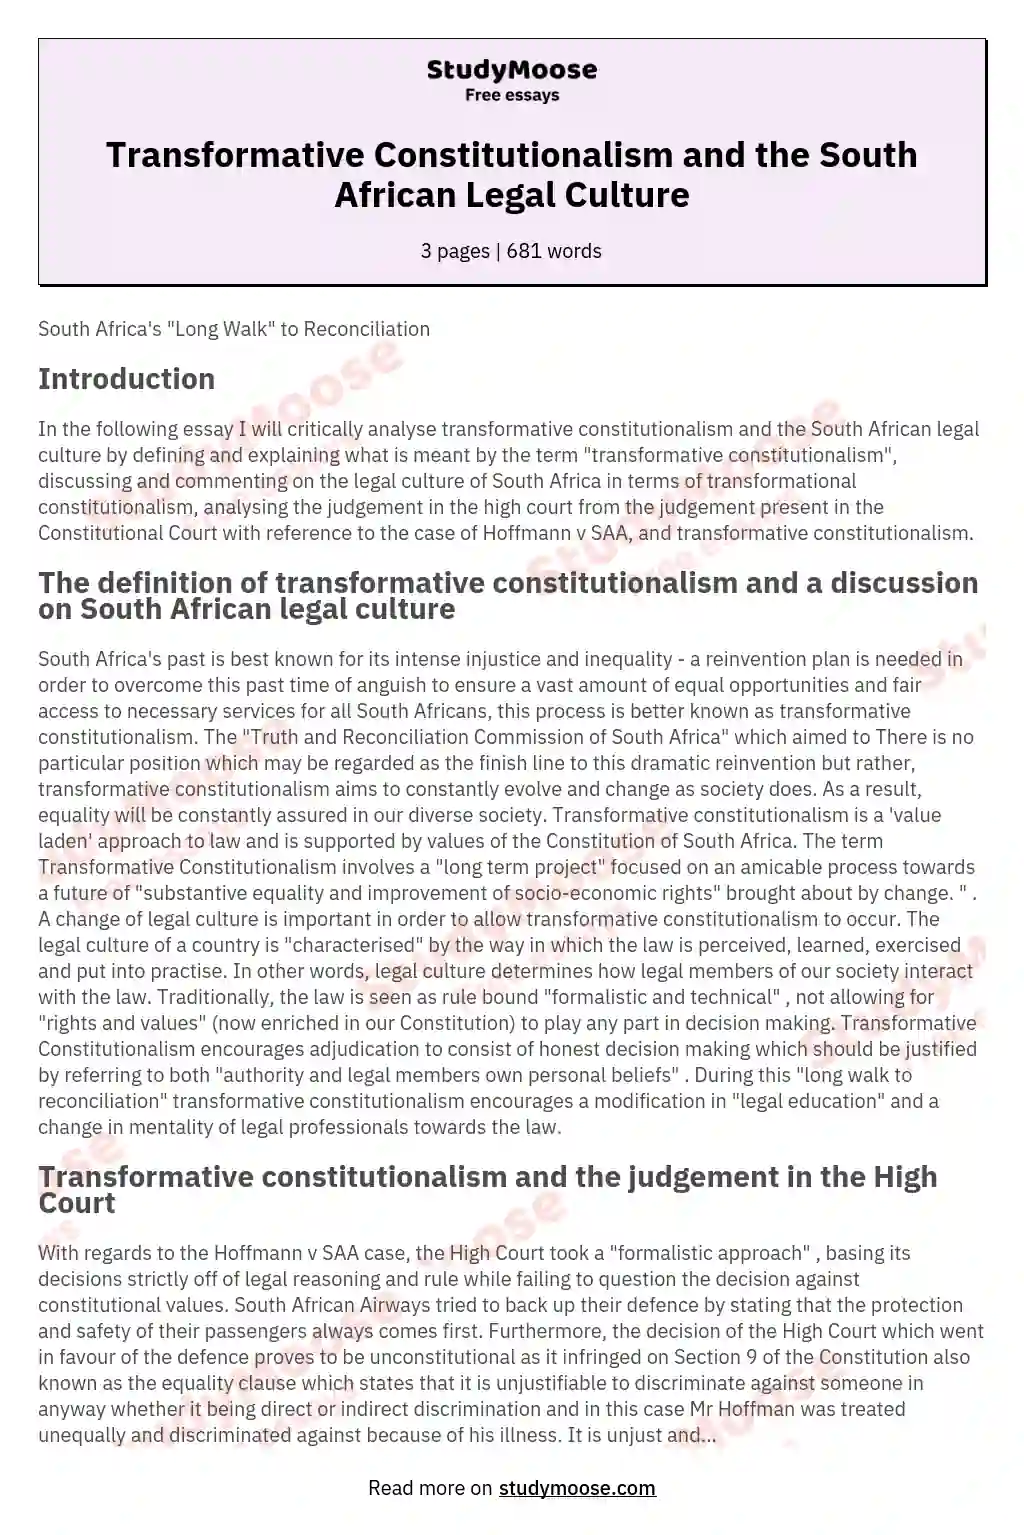 Transformative Constitutionalism and the South African Legal Culture